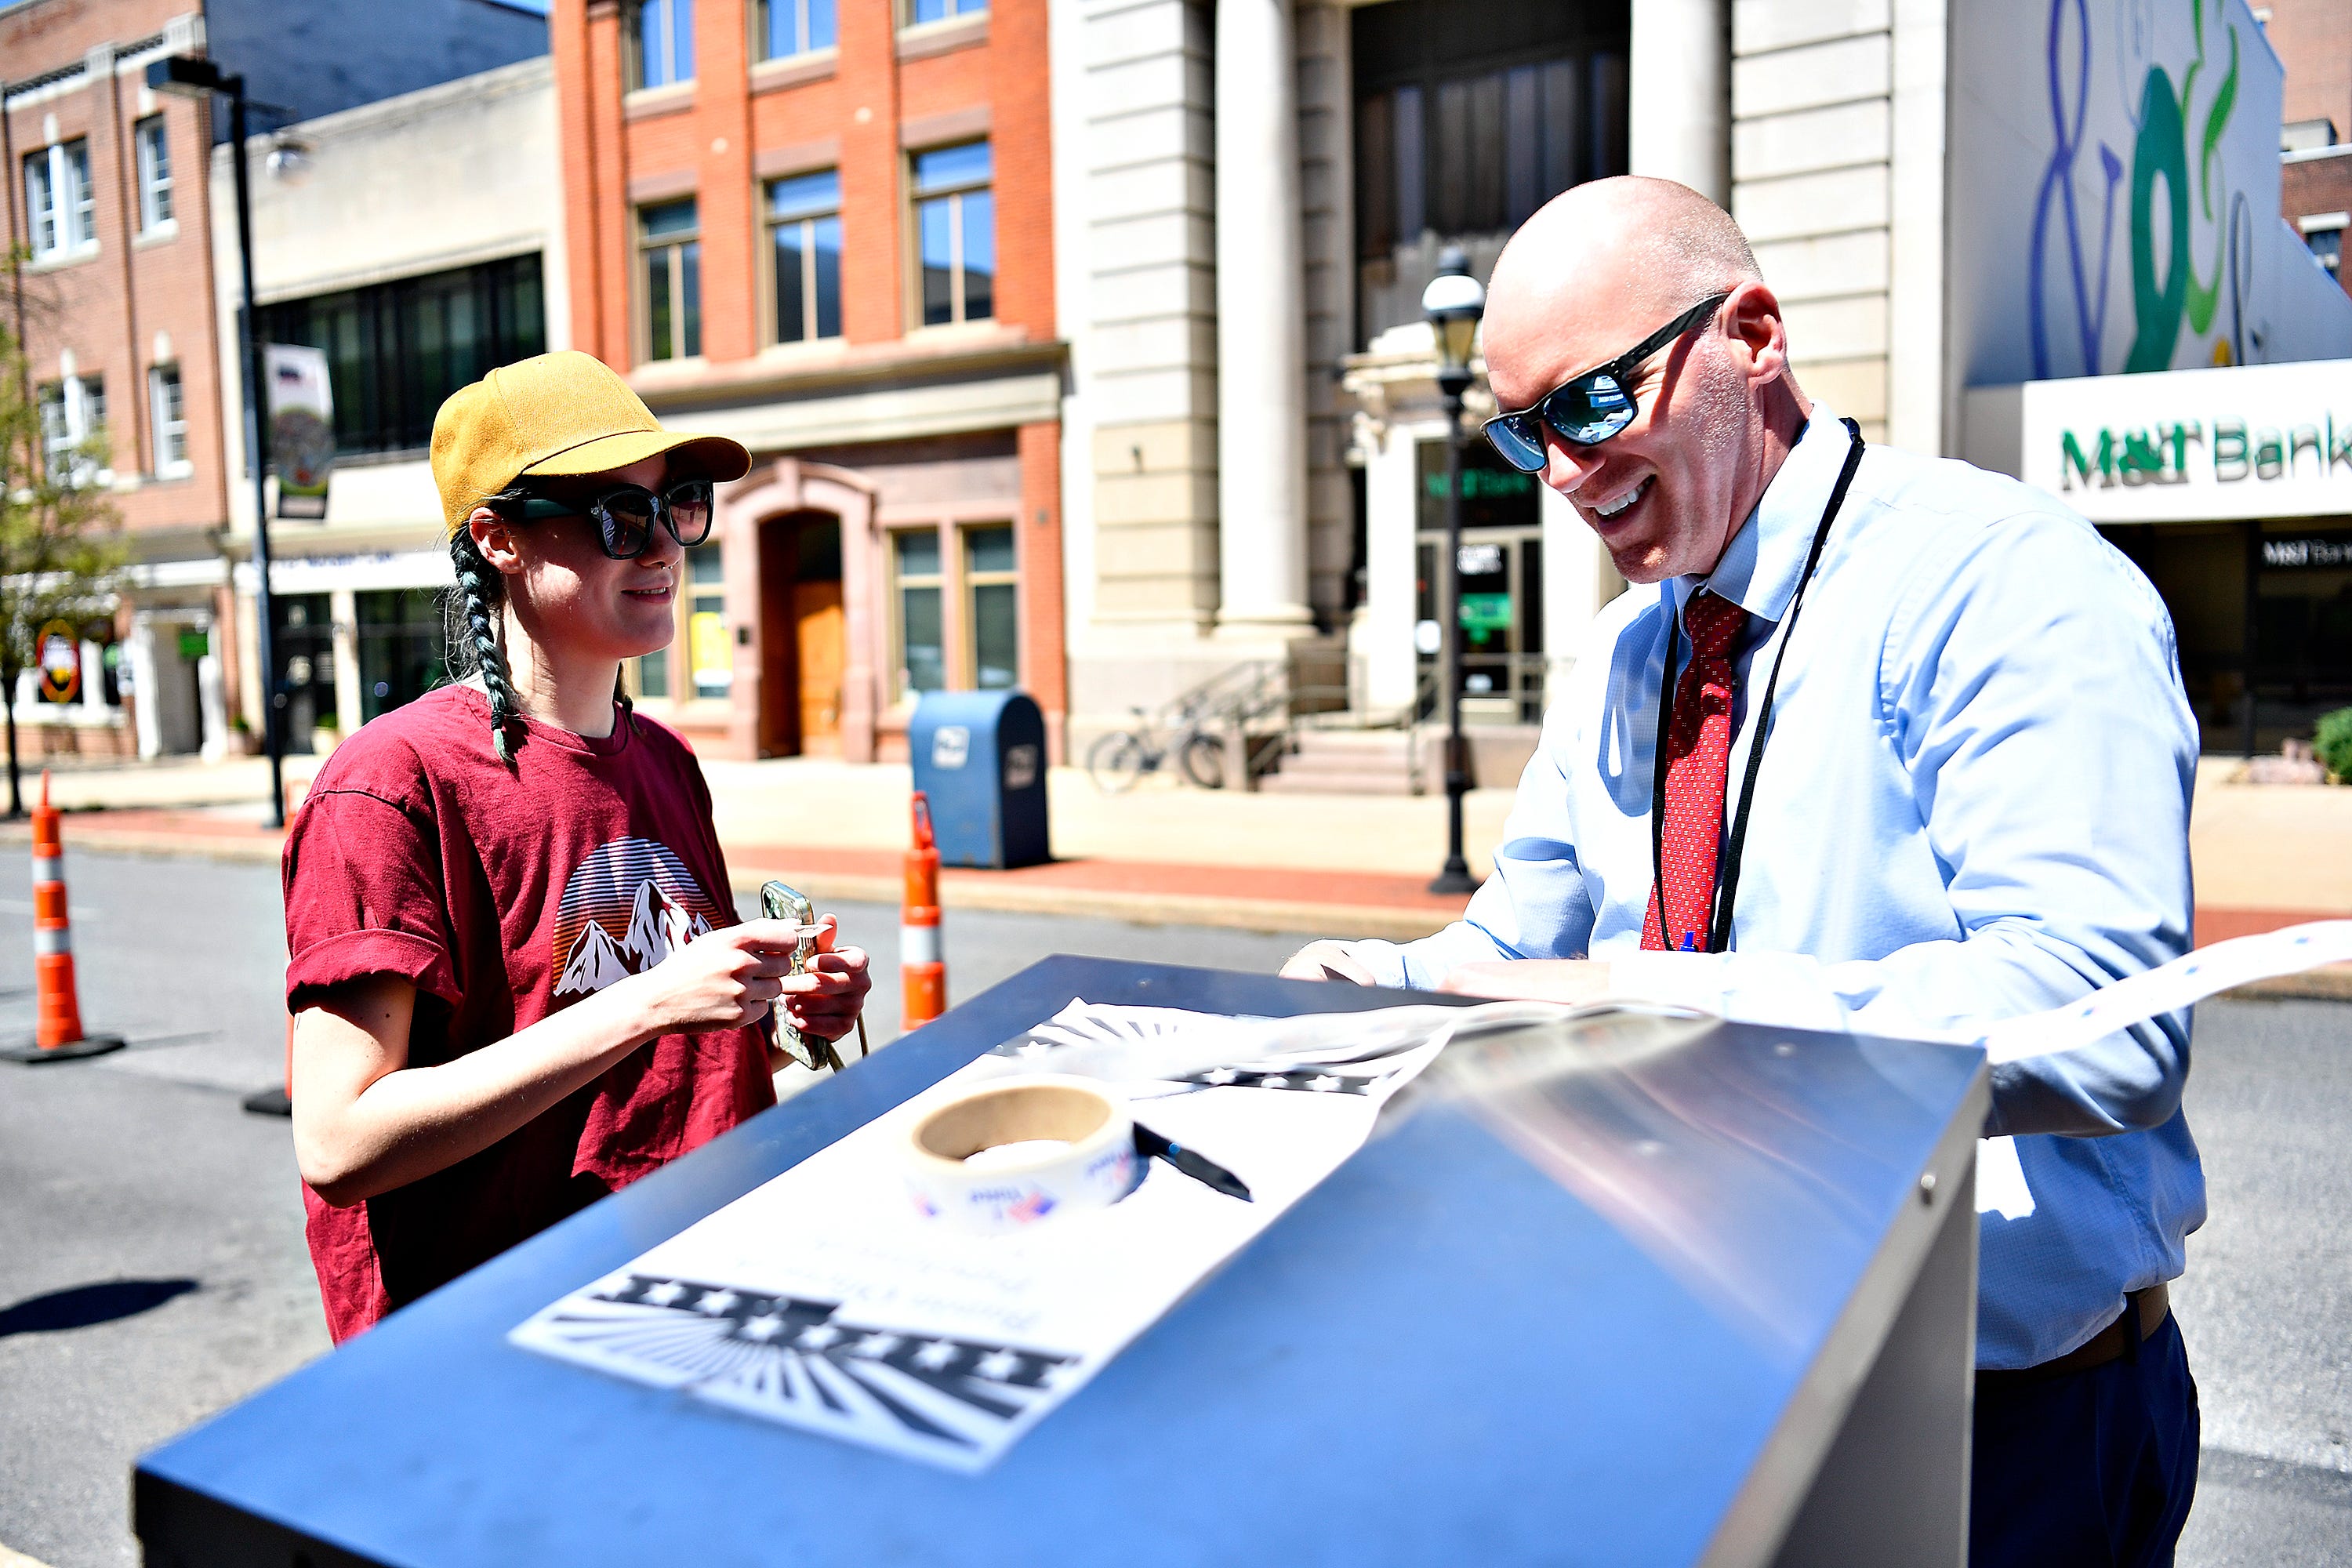 Kayleigh Johnson, left, of York City, looks on as York County Prison Warden Adam Ogle, drops Johnson’s ballot into a secured drop box in front of the York County Administrative Center on East Market Street in York City during Primary Election Day, Tuesday, April 23, 2024. (Dawn J. Sagert/The York Dispatch)